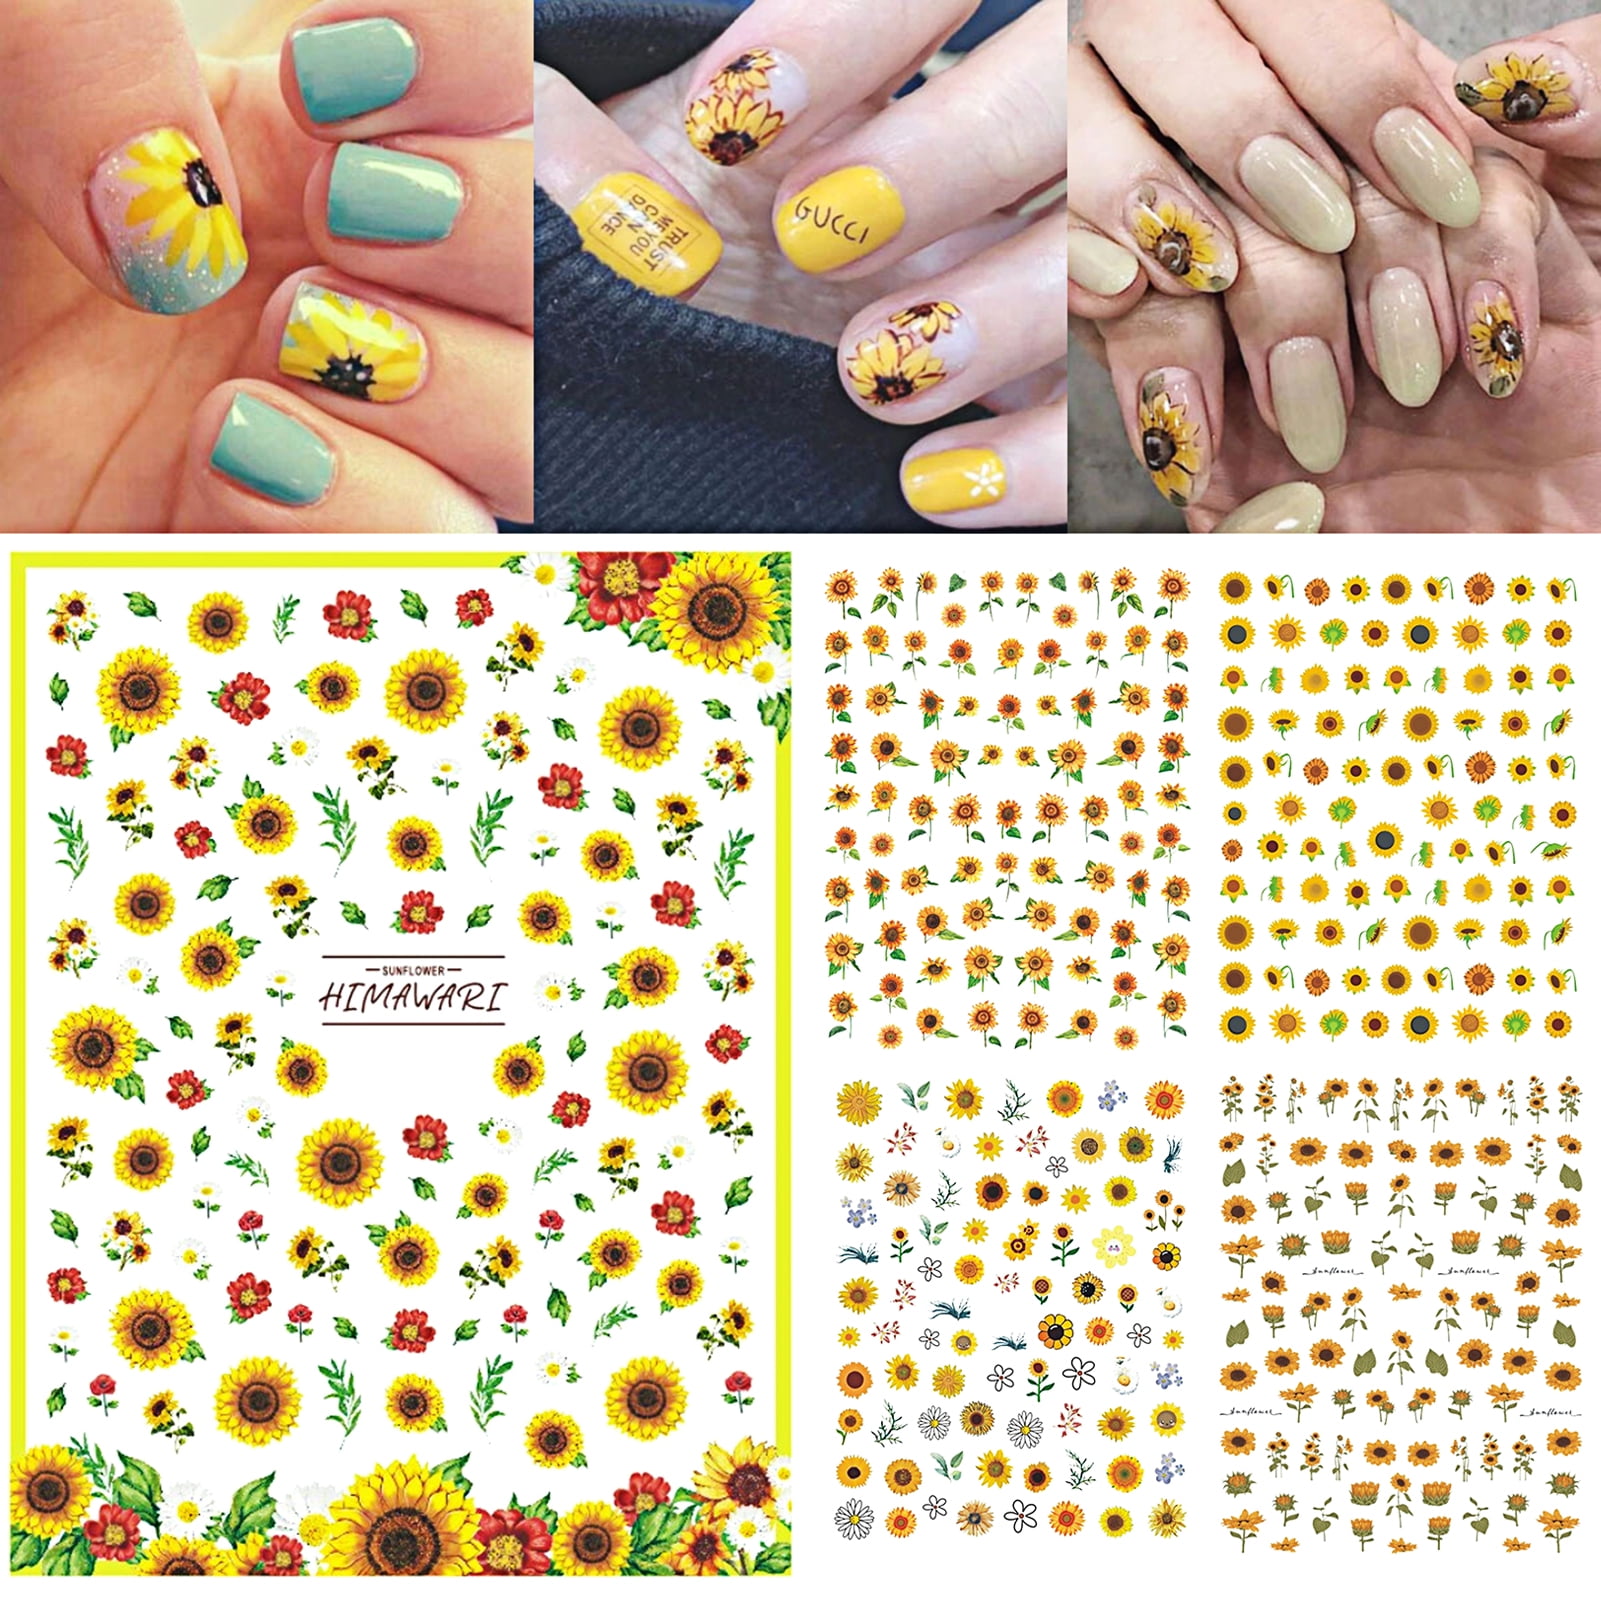 59 Acrylic Sunflower Nails Images, Stock Photos, 3D objects, & Vectors |  Shutterstock